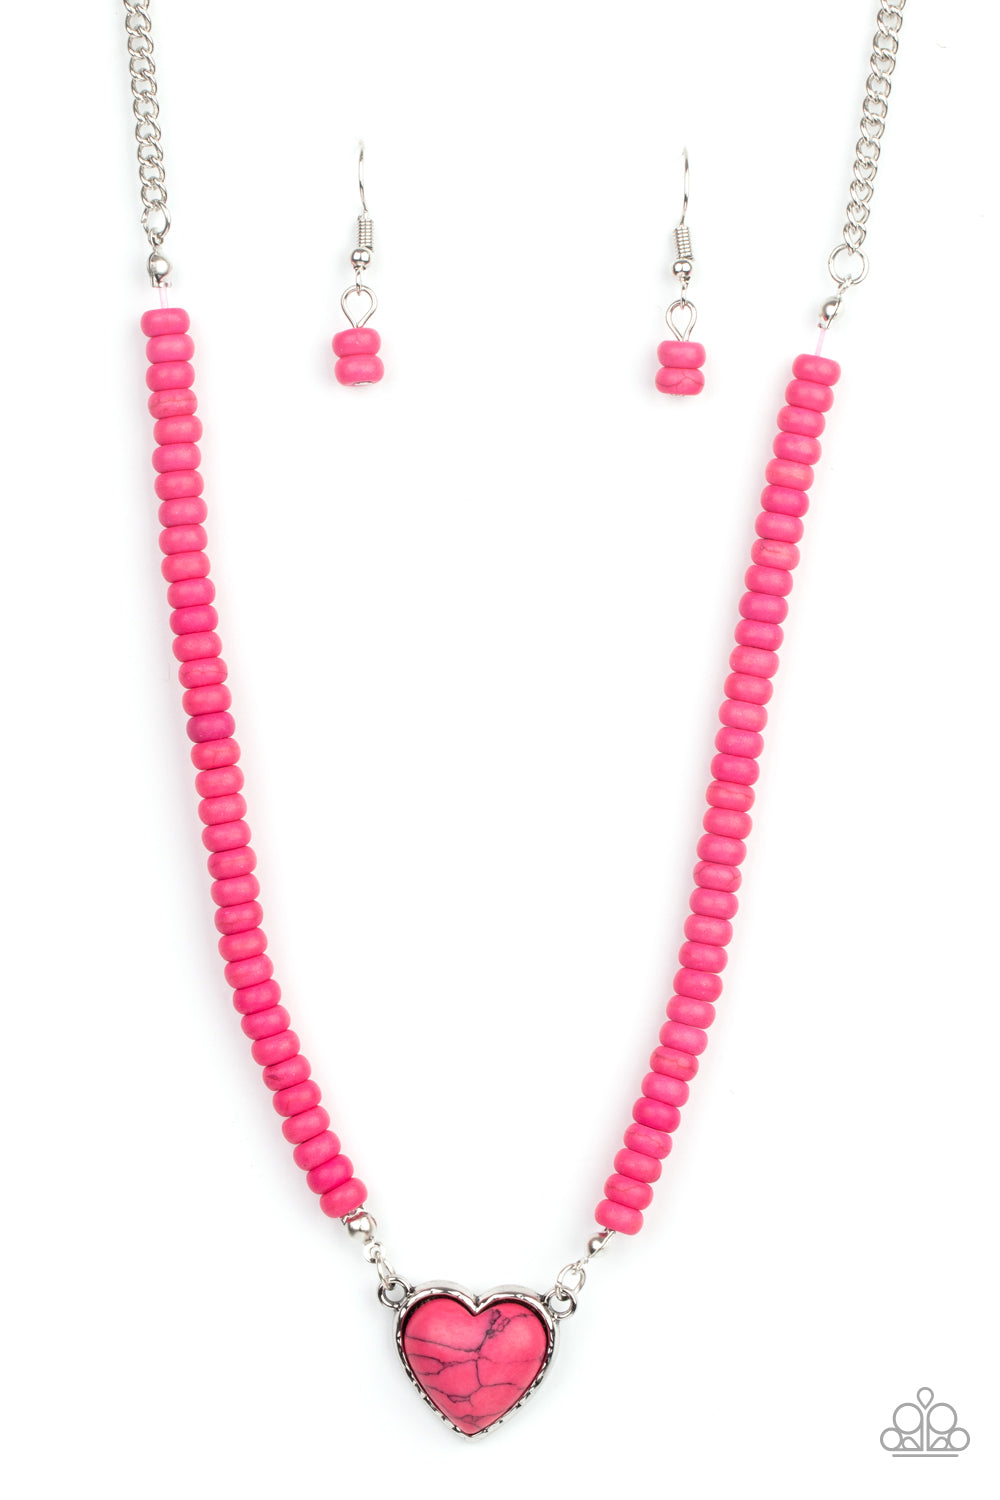 Country Sweetheart Pink Heart Necklace - Paparazzi Accessories  Infused with pink stone beads, a charming pink heart stone pendant swings below the collar for a free-spirited look. Features an adjustable clasp closure.  Sold as one individual necklace. Includes one pair of matching earrings.  Get The Complete Look! Bracelet: "Charmingly Country - Pink" (Sold Separately)